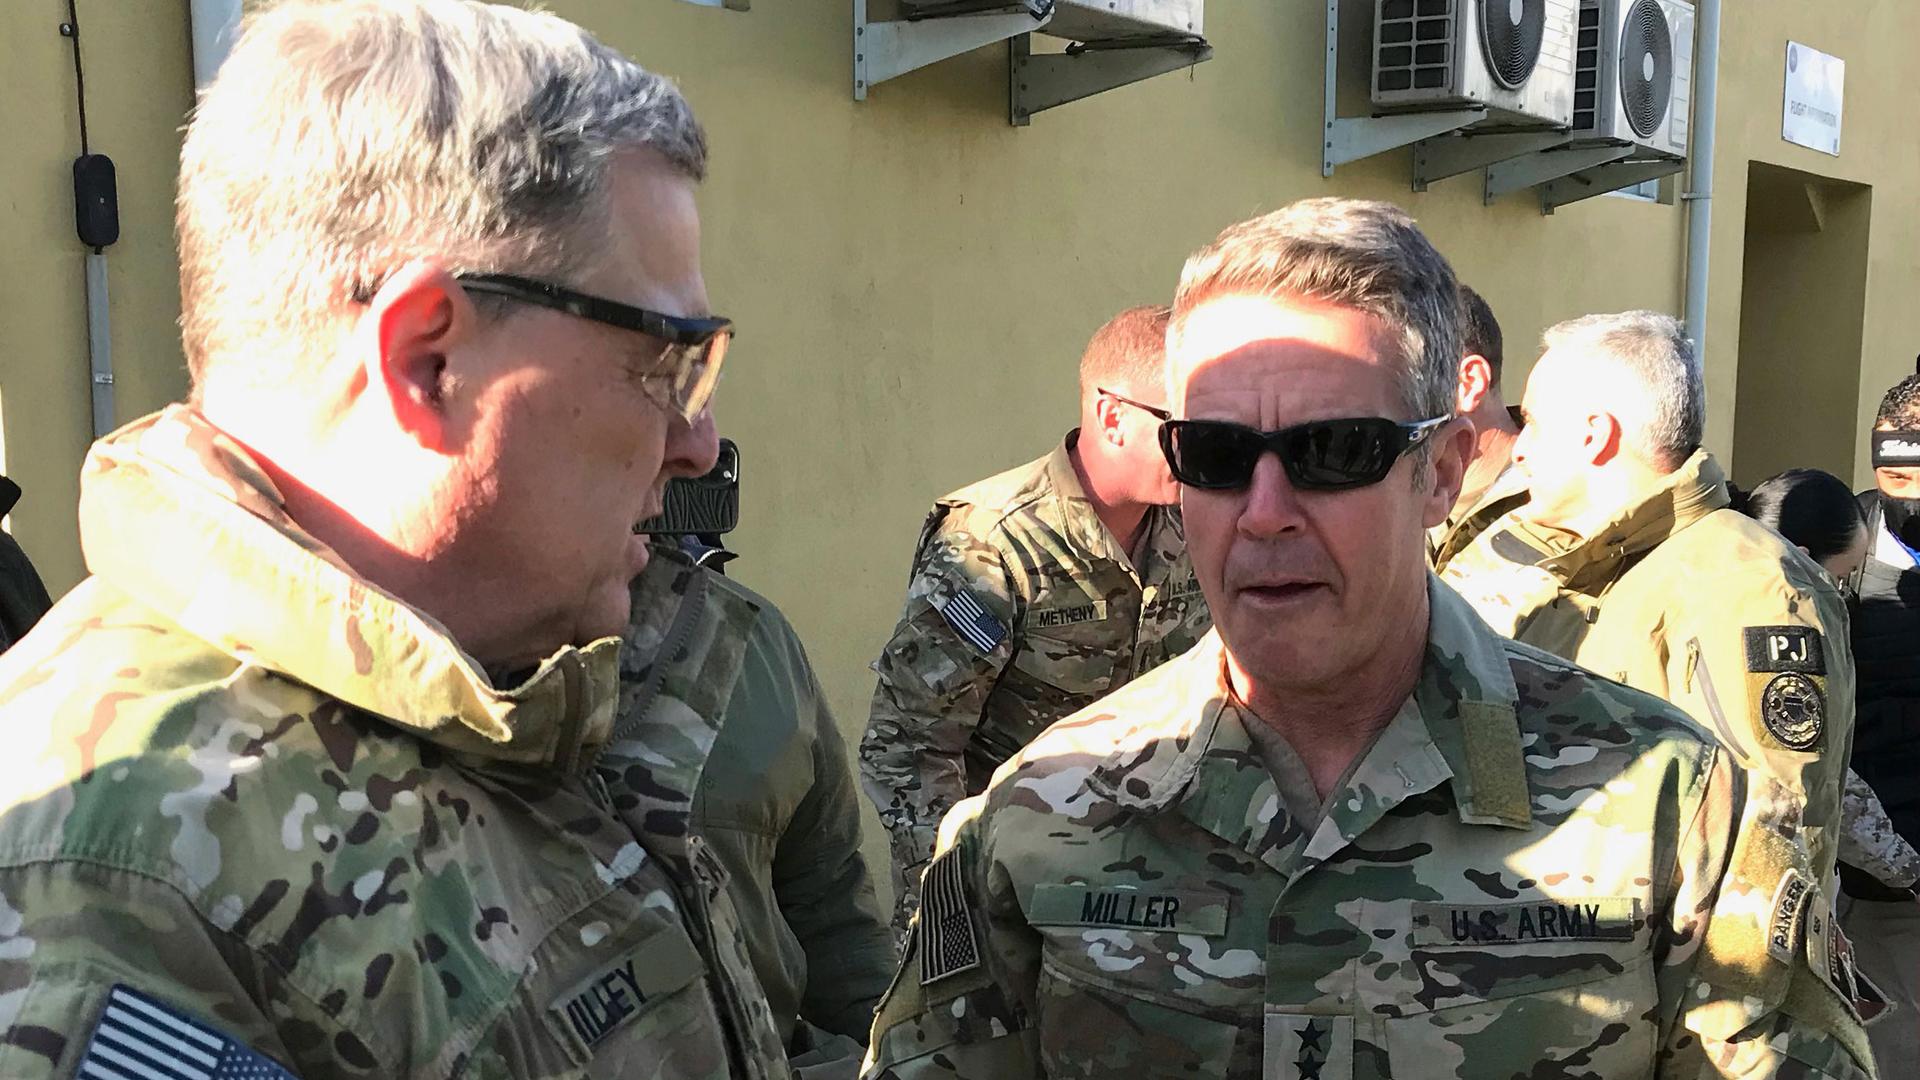 Gen. Mark Milley and Gen. Scott Miller are shown facing each other and wearing military fatigues.